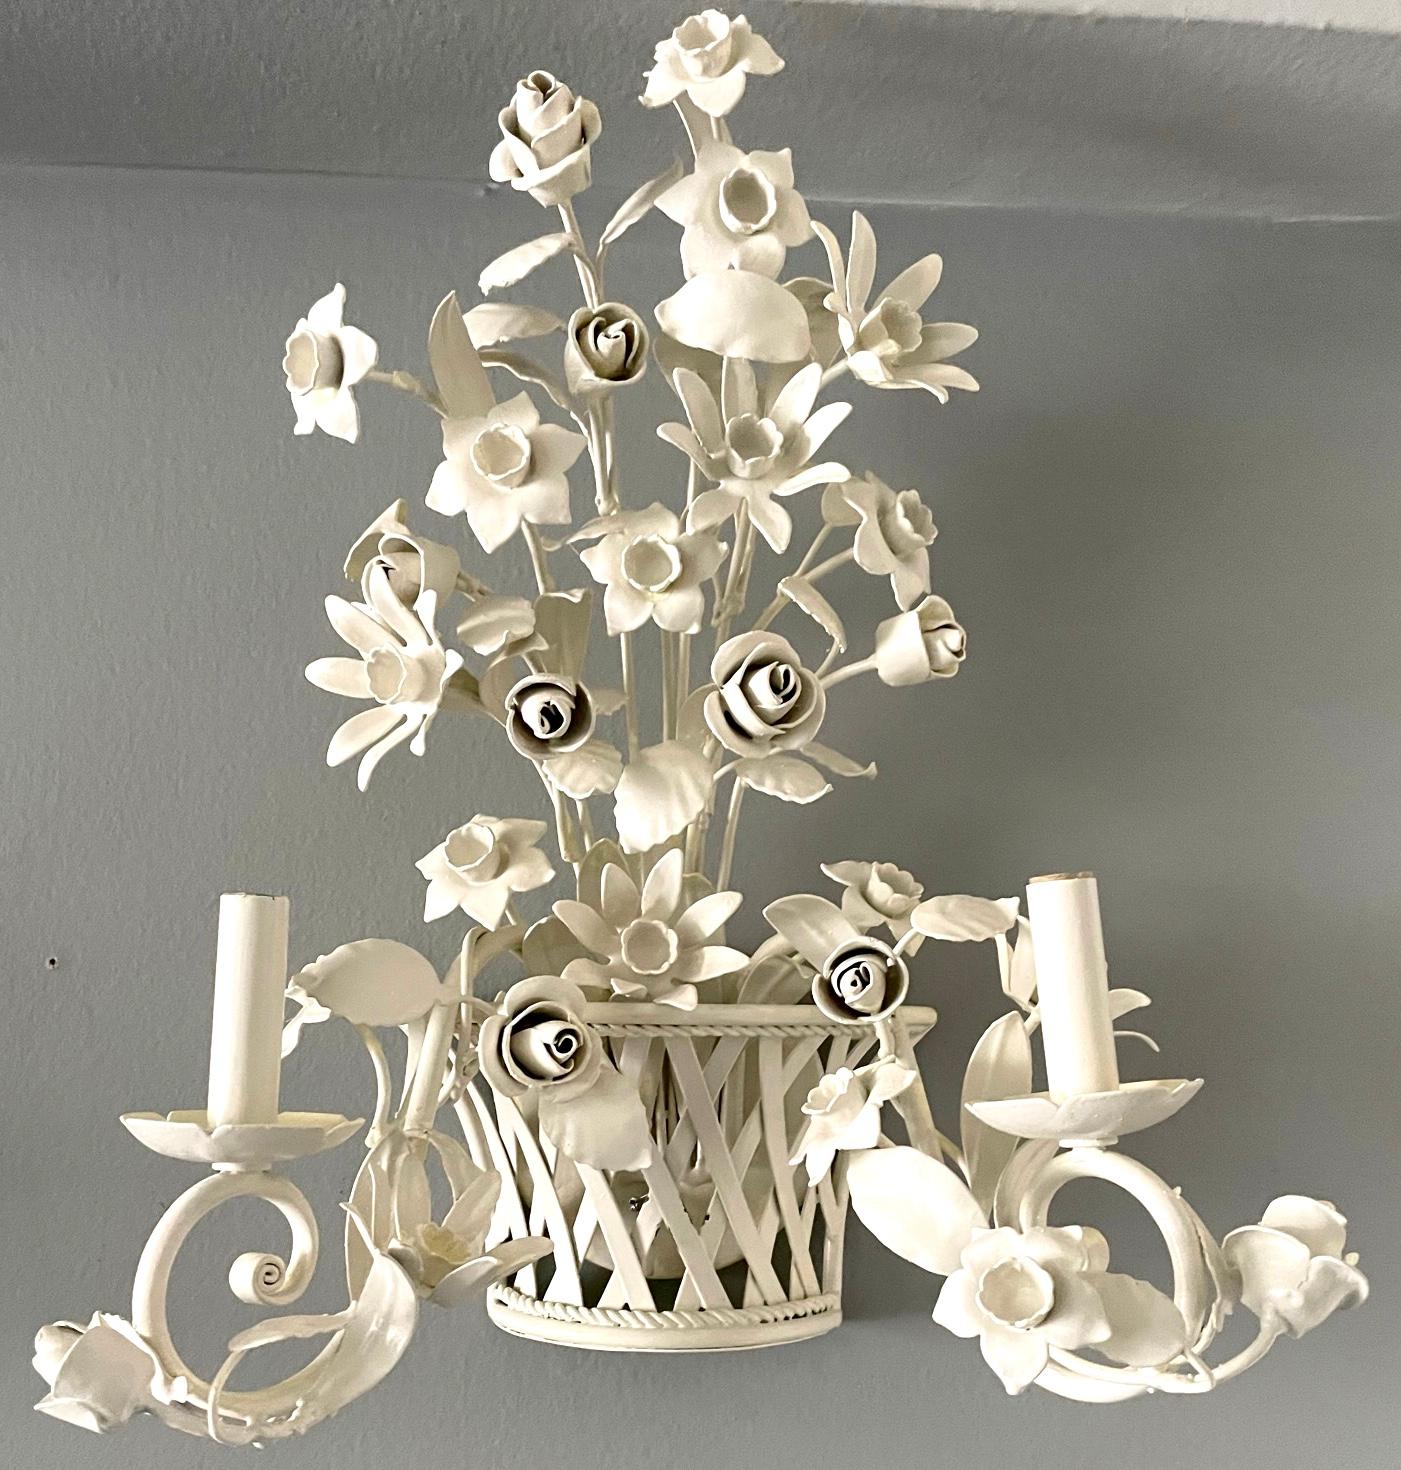 Pair French tole basket sconces with flowers. Pair vintage white painted tole and metal basket sconces issuing varied profusion of blooms and double arm candlestick. France, Mid-20th century
Dimensions: sconce 1: 16